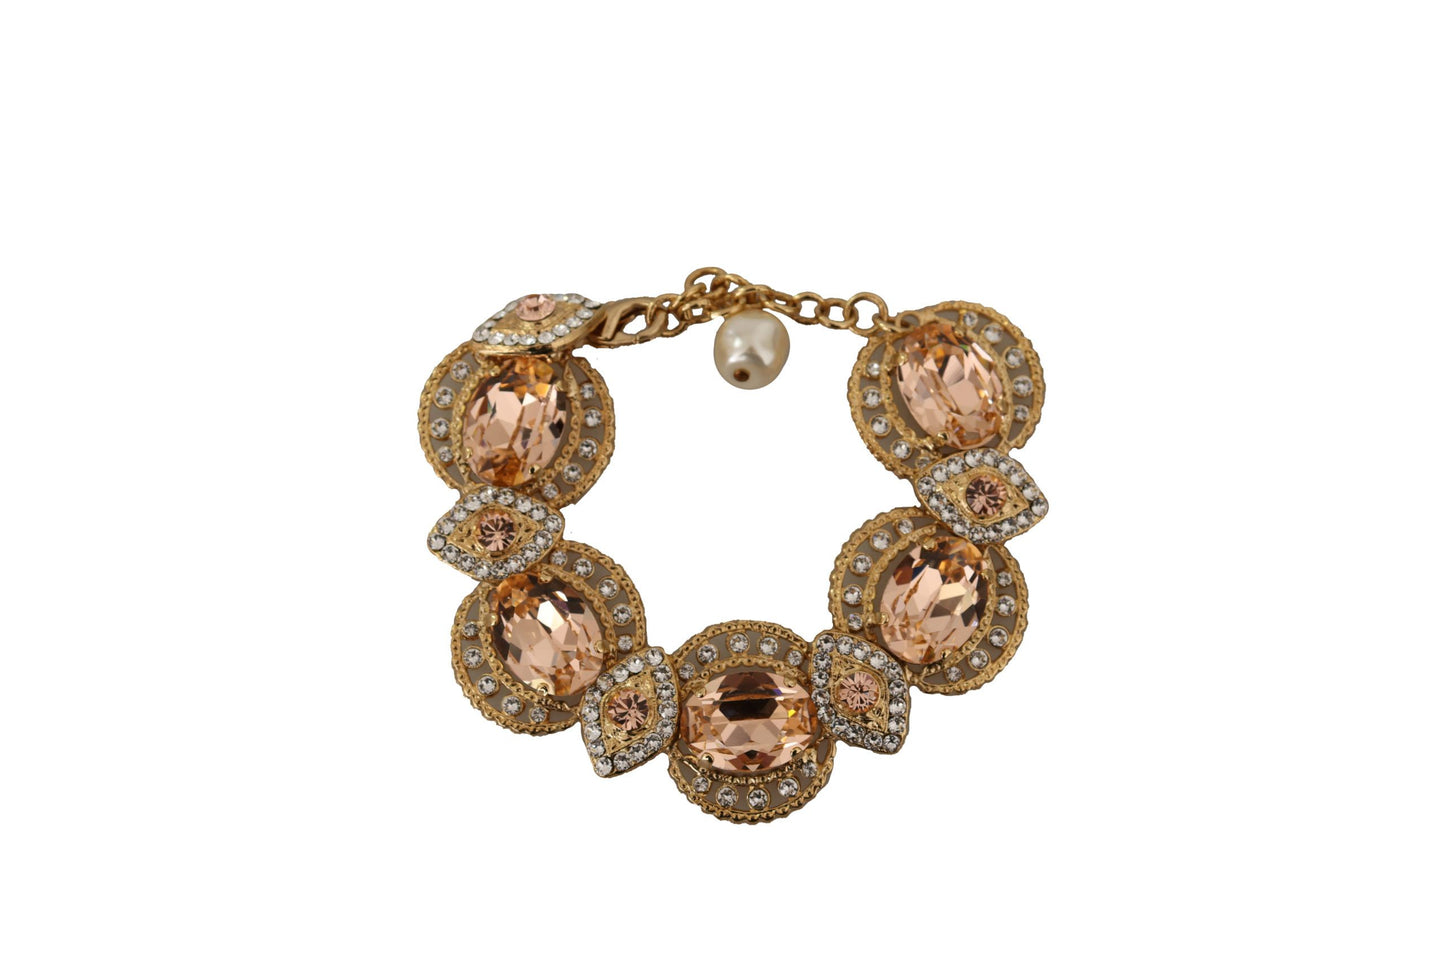 Dolce & Gabbana Gold Messing Kette Champagner Kristall Statement Charms Armband